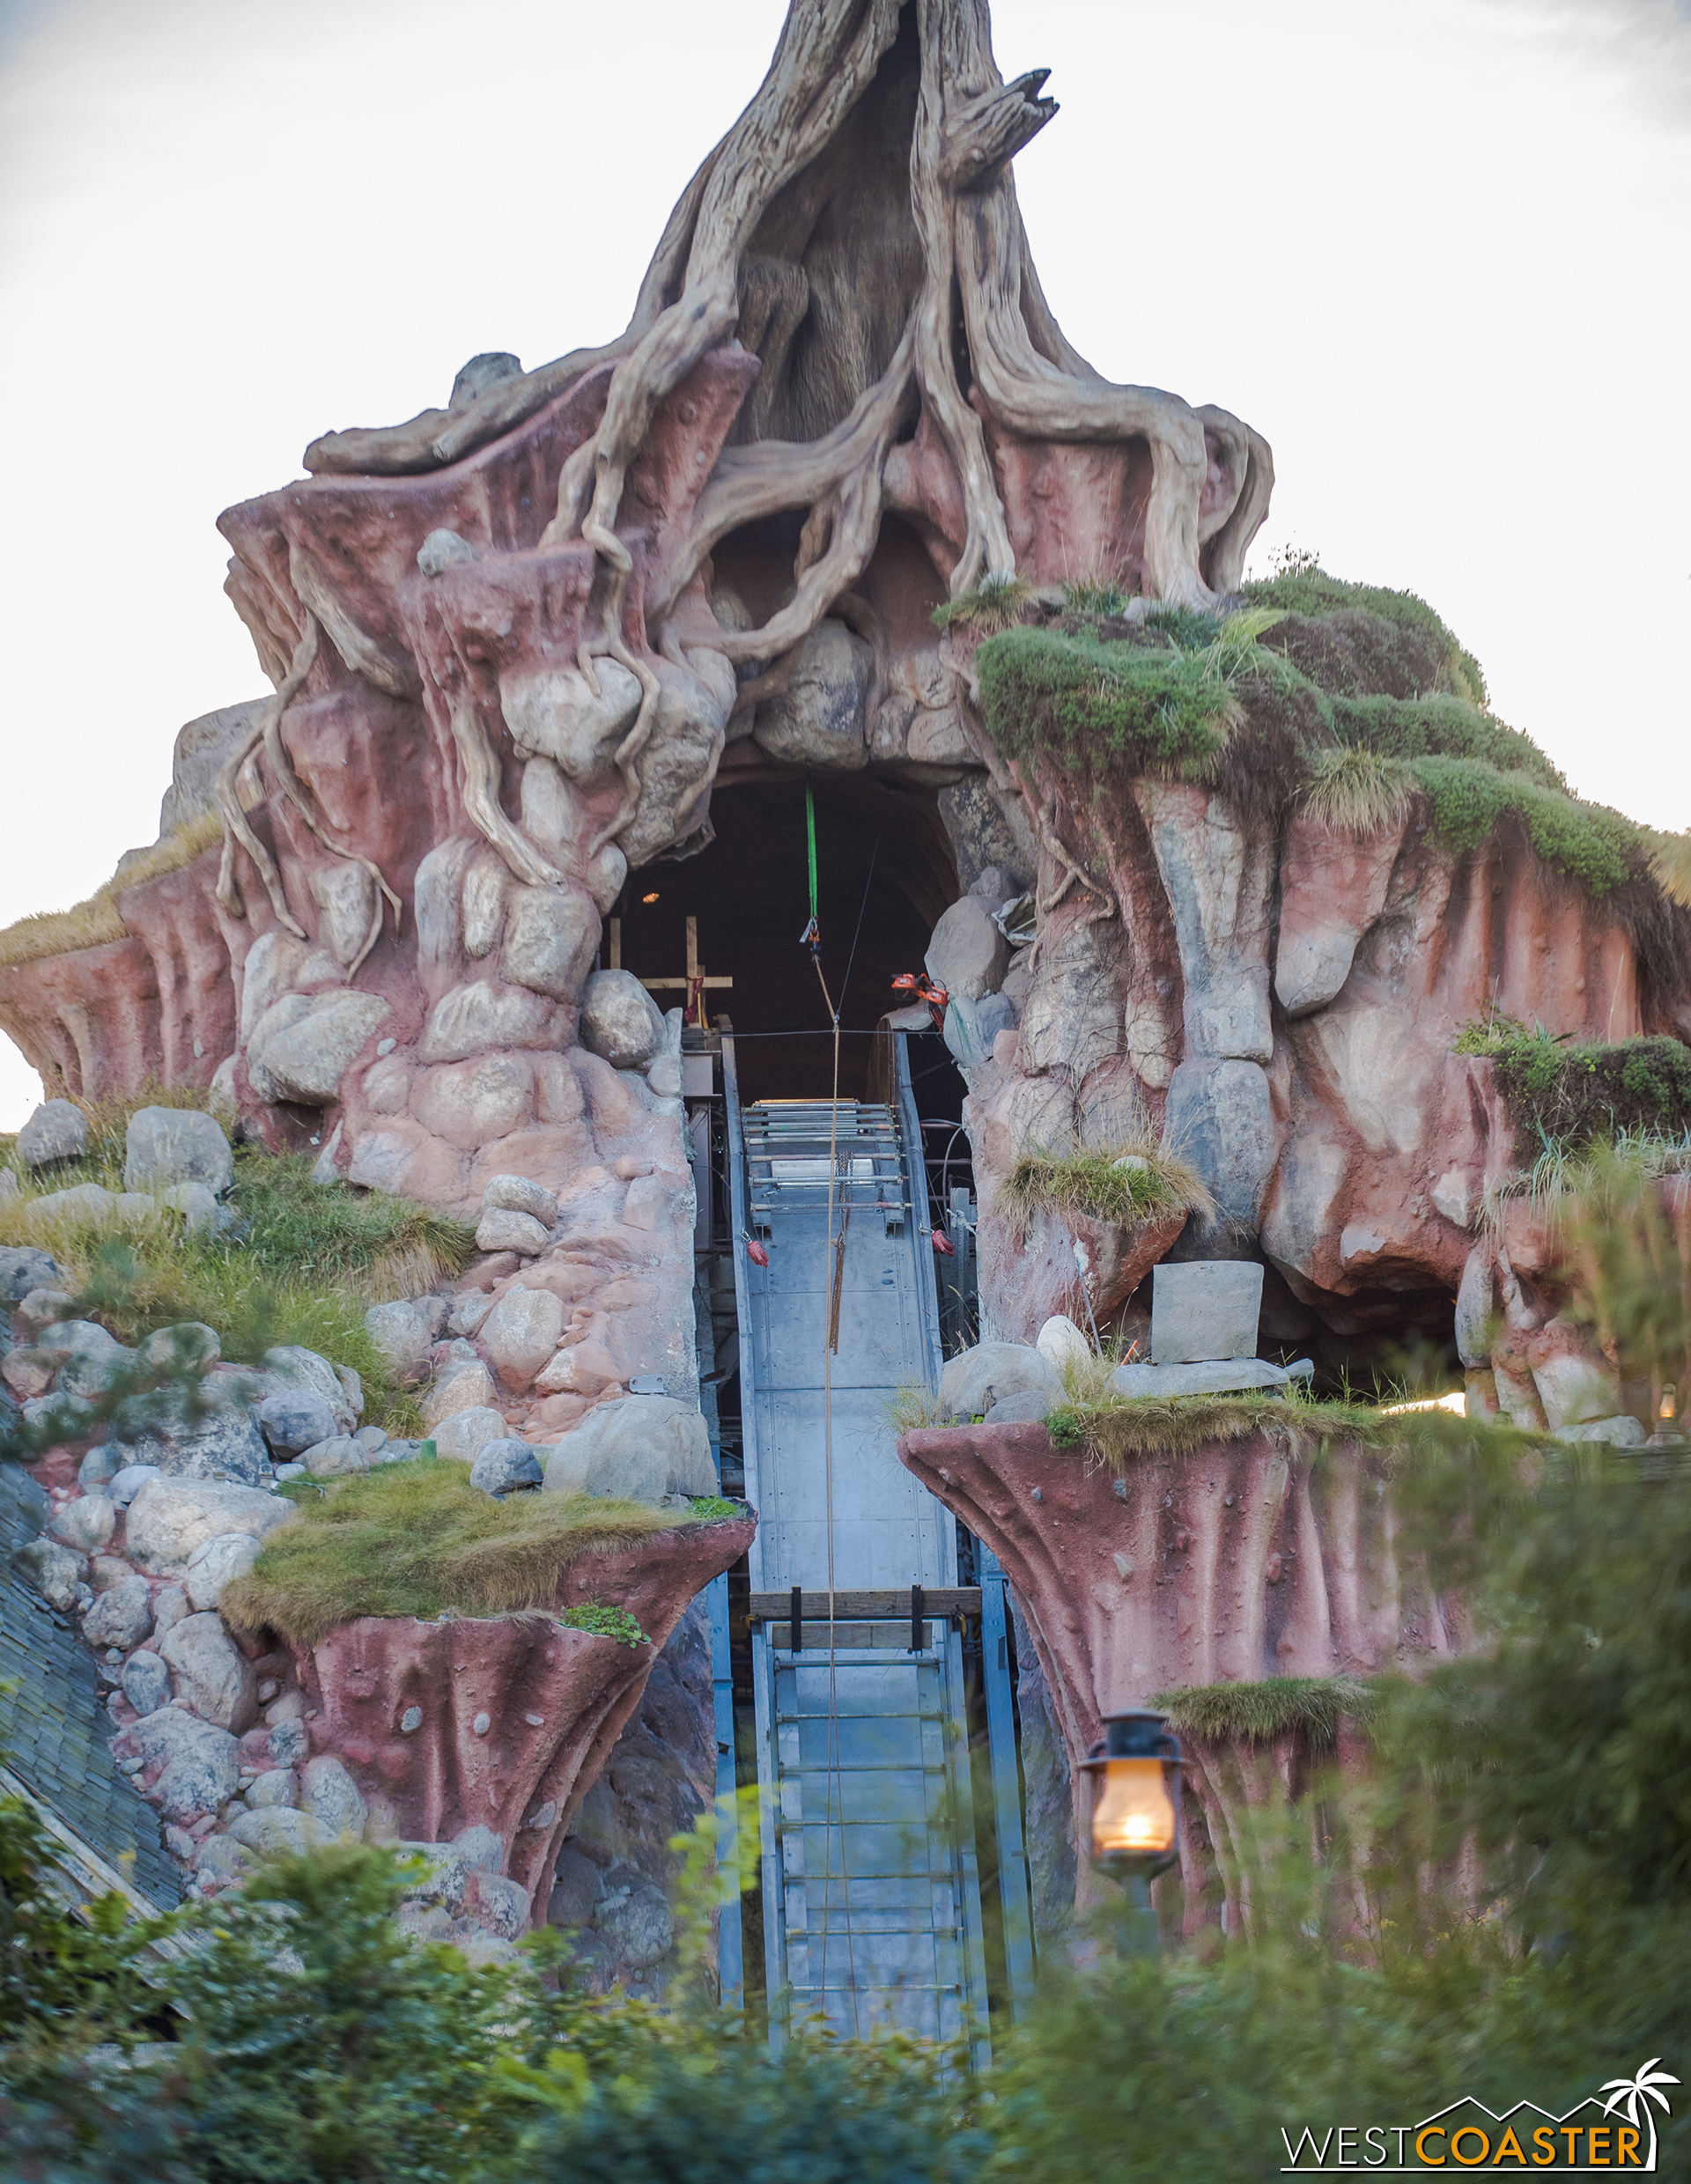  Splash Mountain... still not splashing.&nbsp; Though at least the actual flume seems to be returning! 